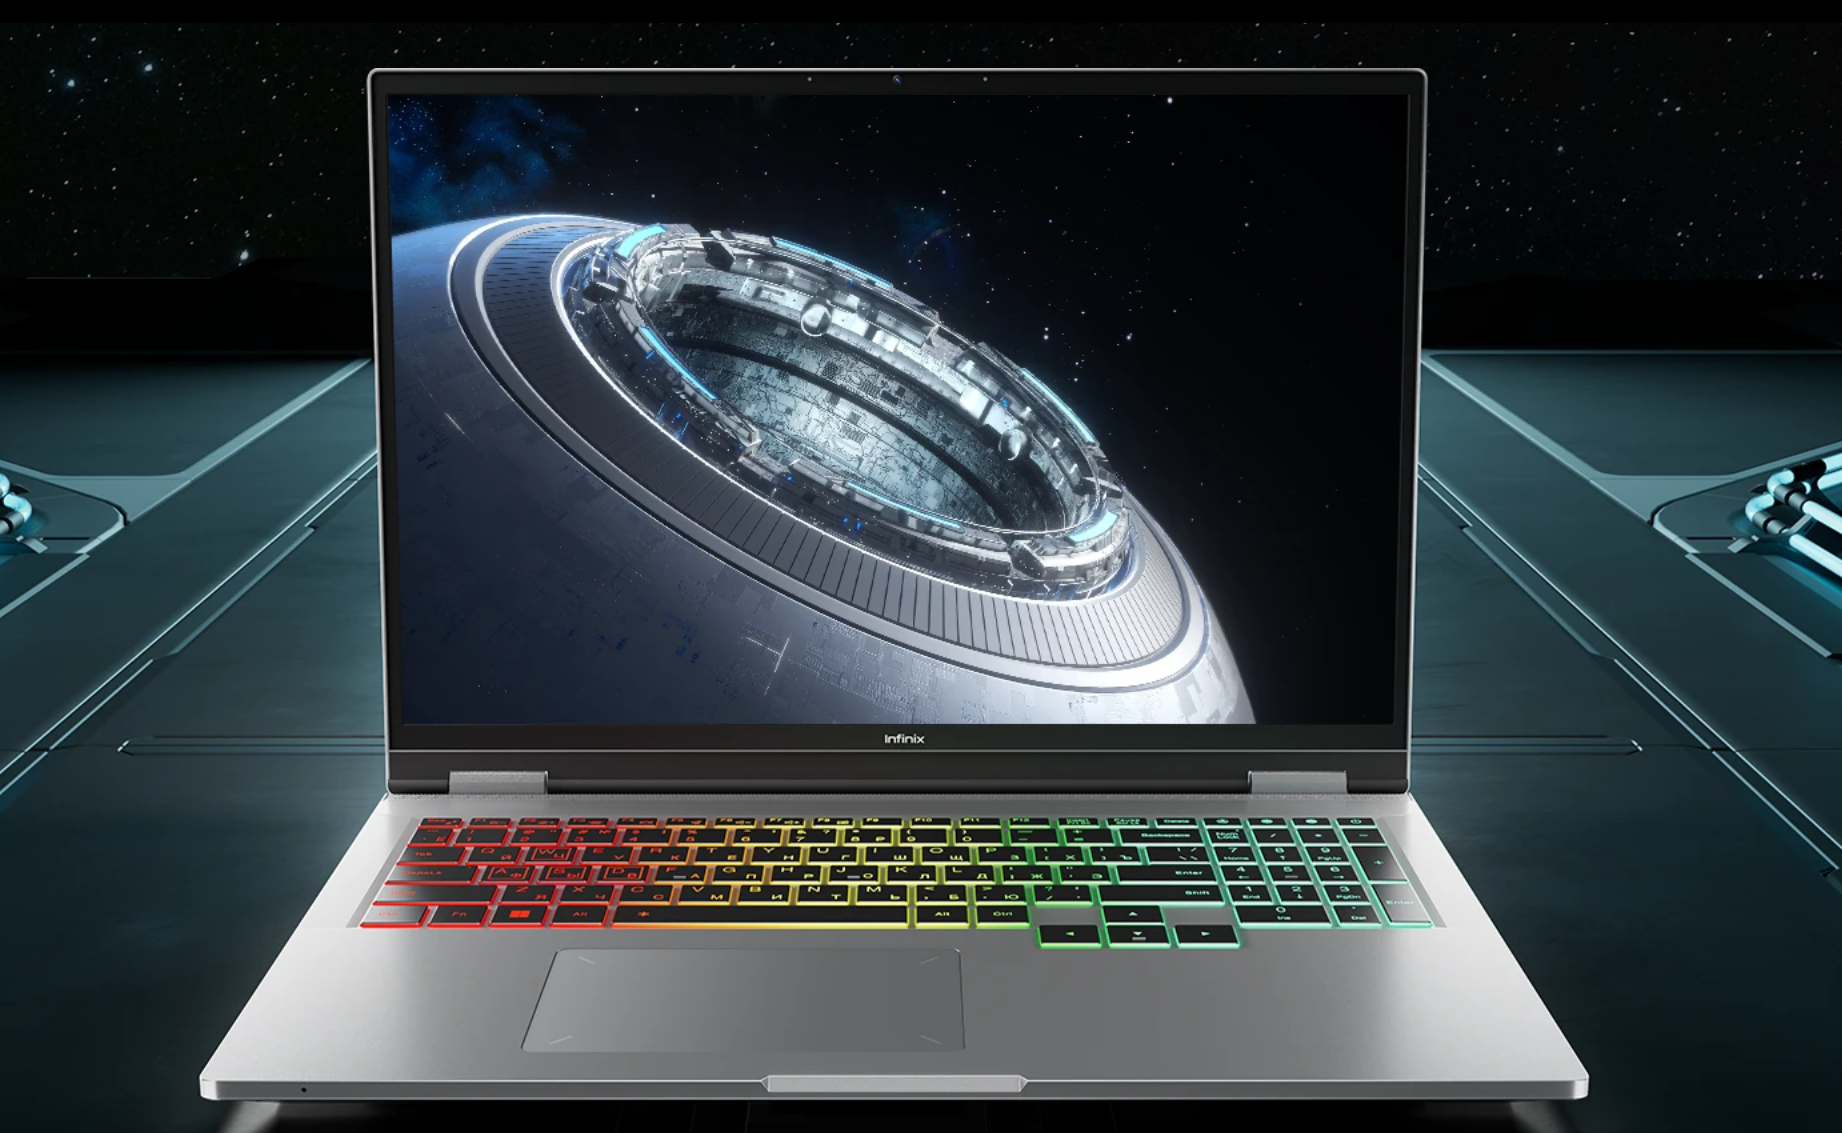 GT Book laptop, which form the company's 'GTverse' gaming ecosystem